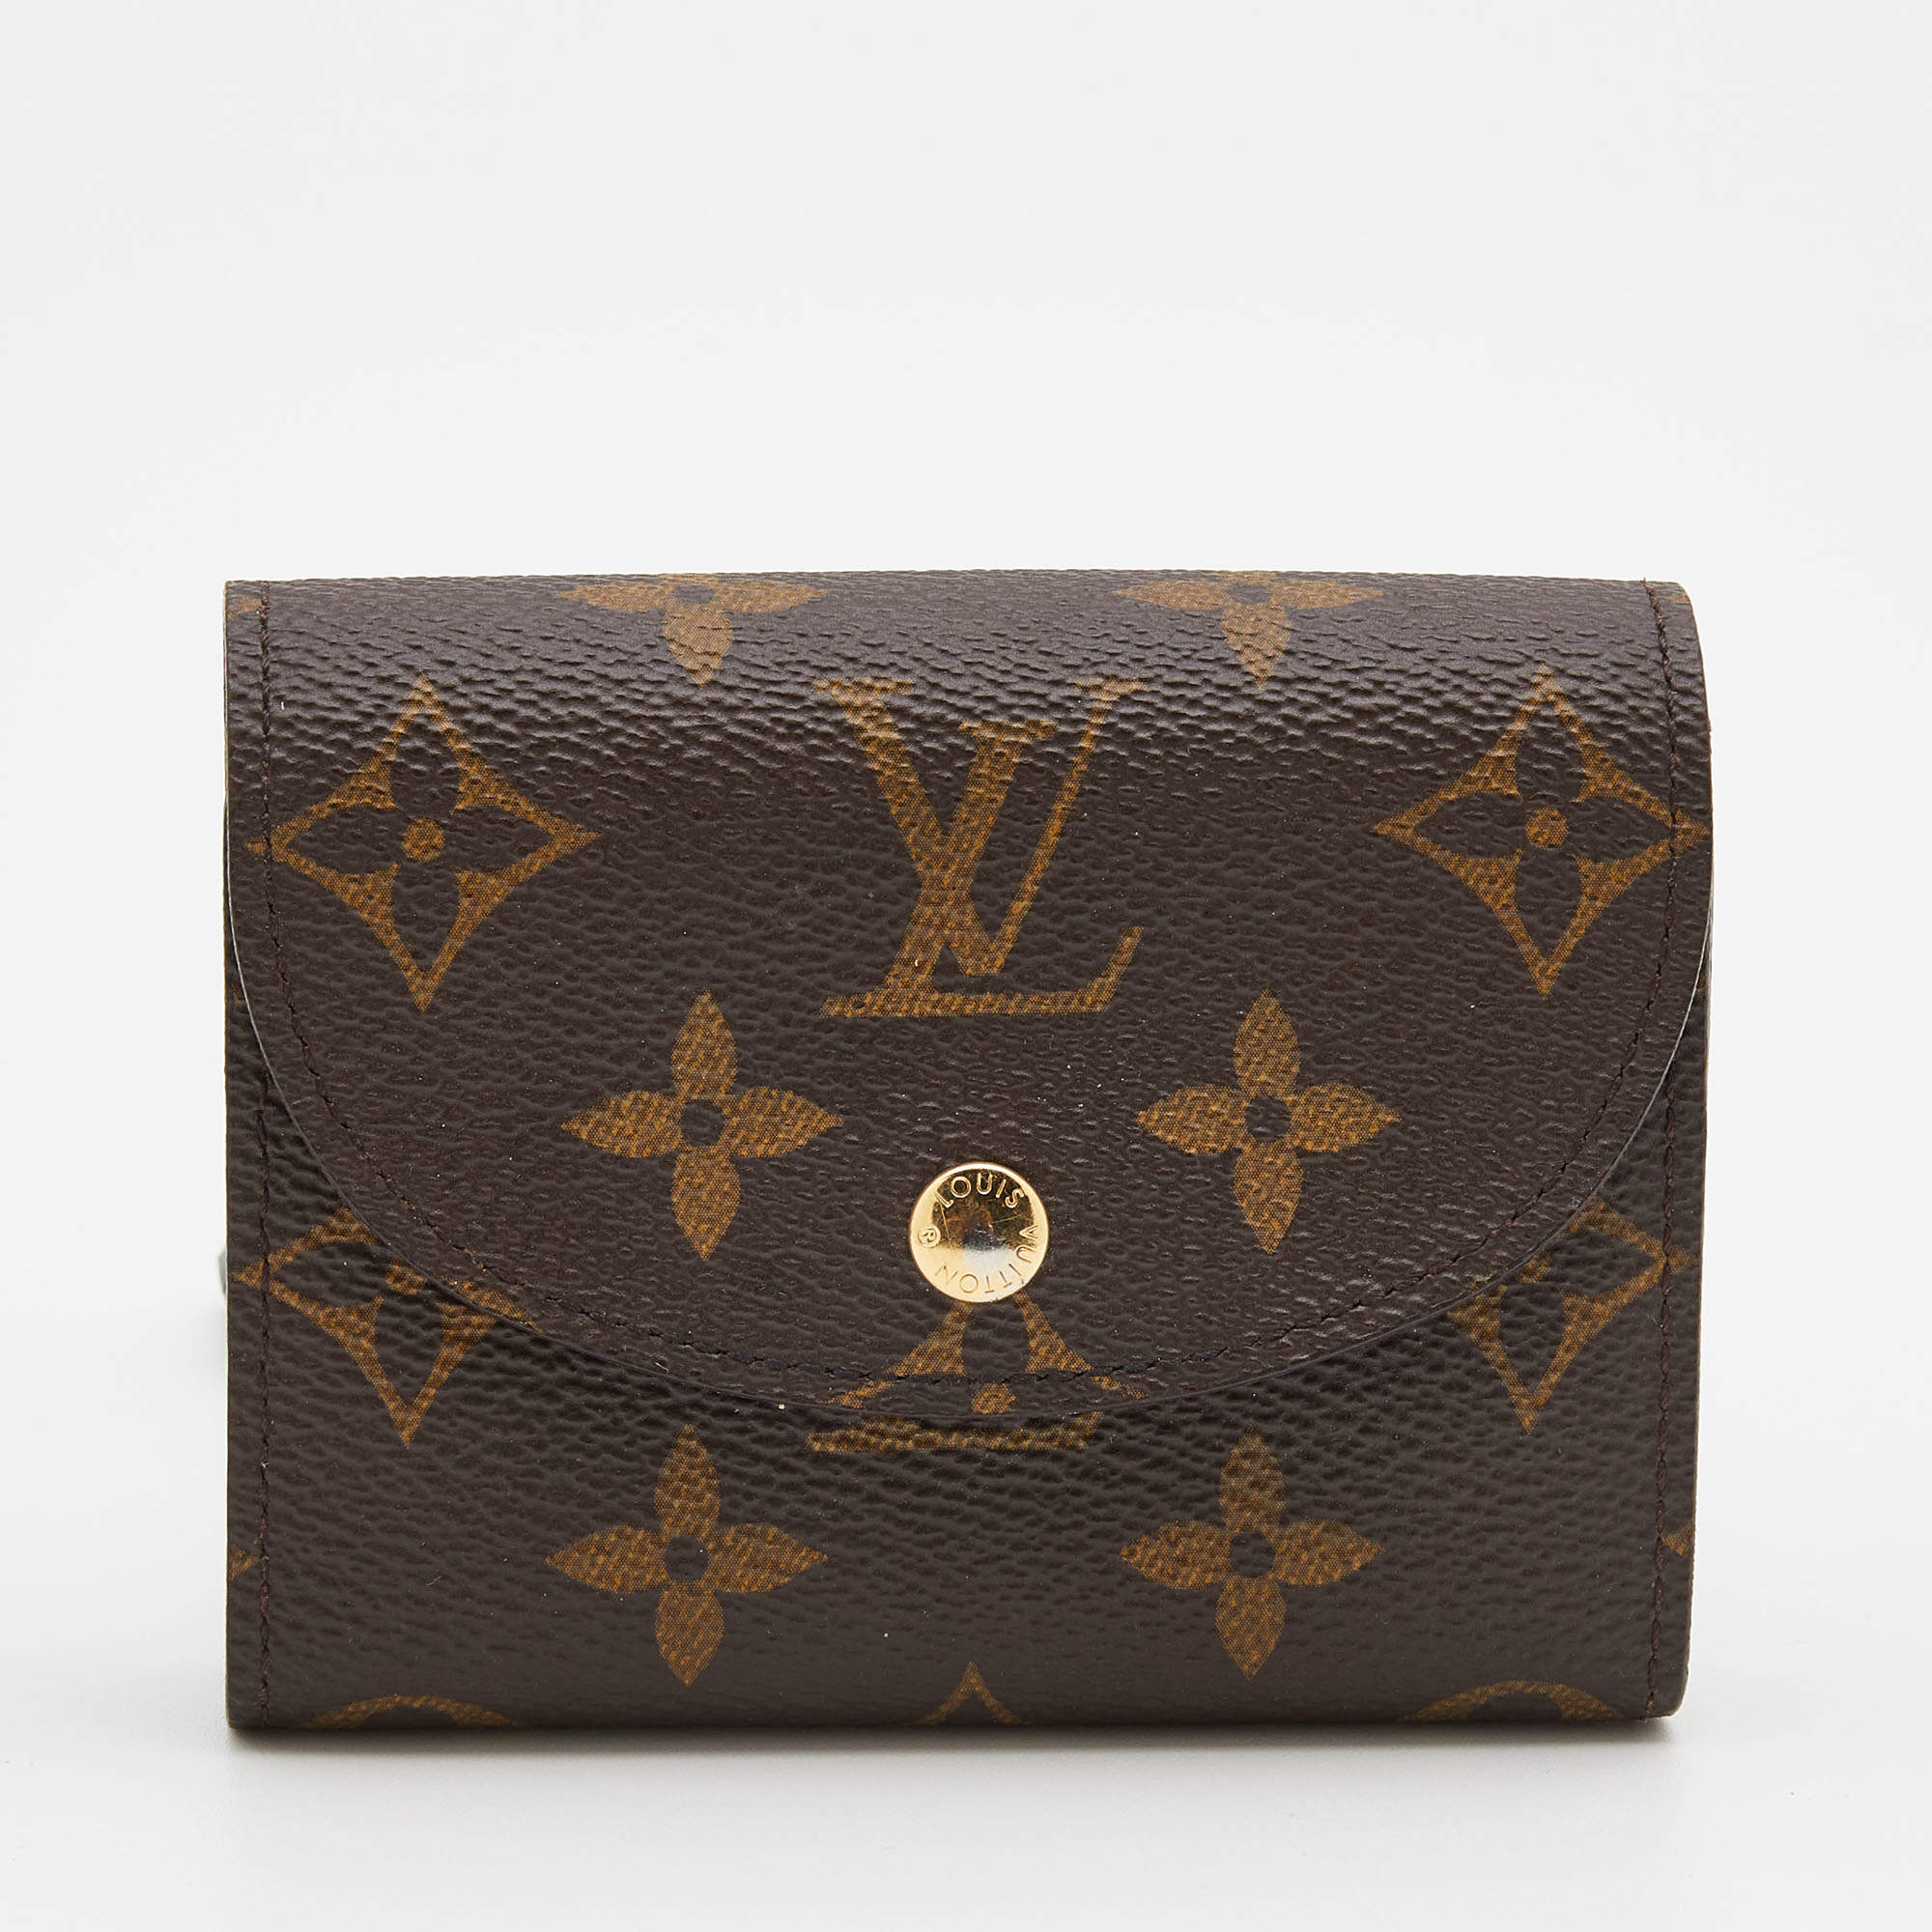 Louis Vuitton Helene Wallet %100 Real Leather Size:10.5x8.5cm We